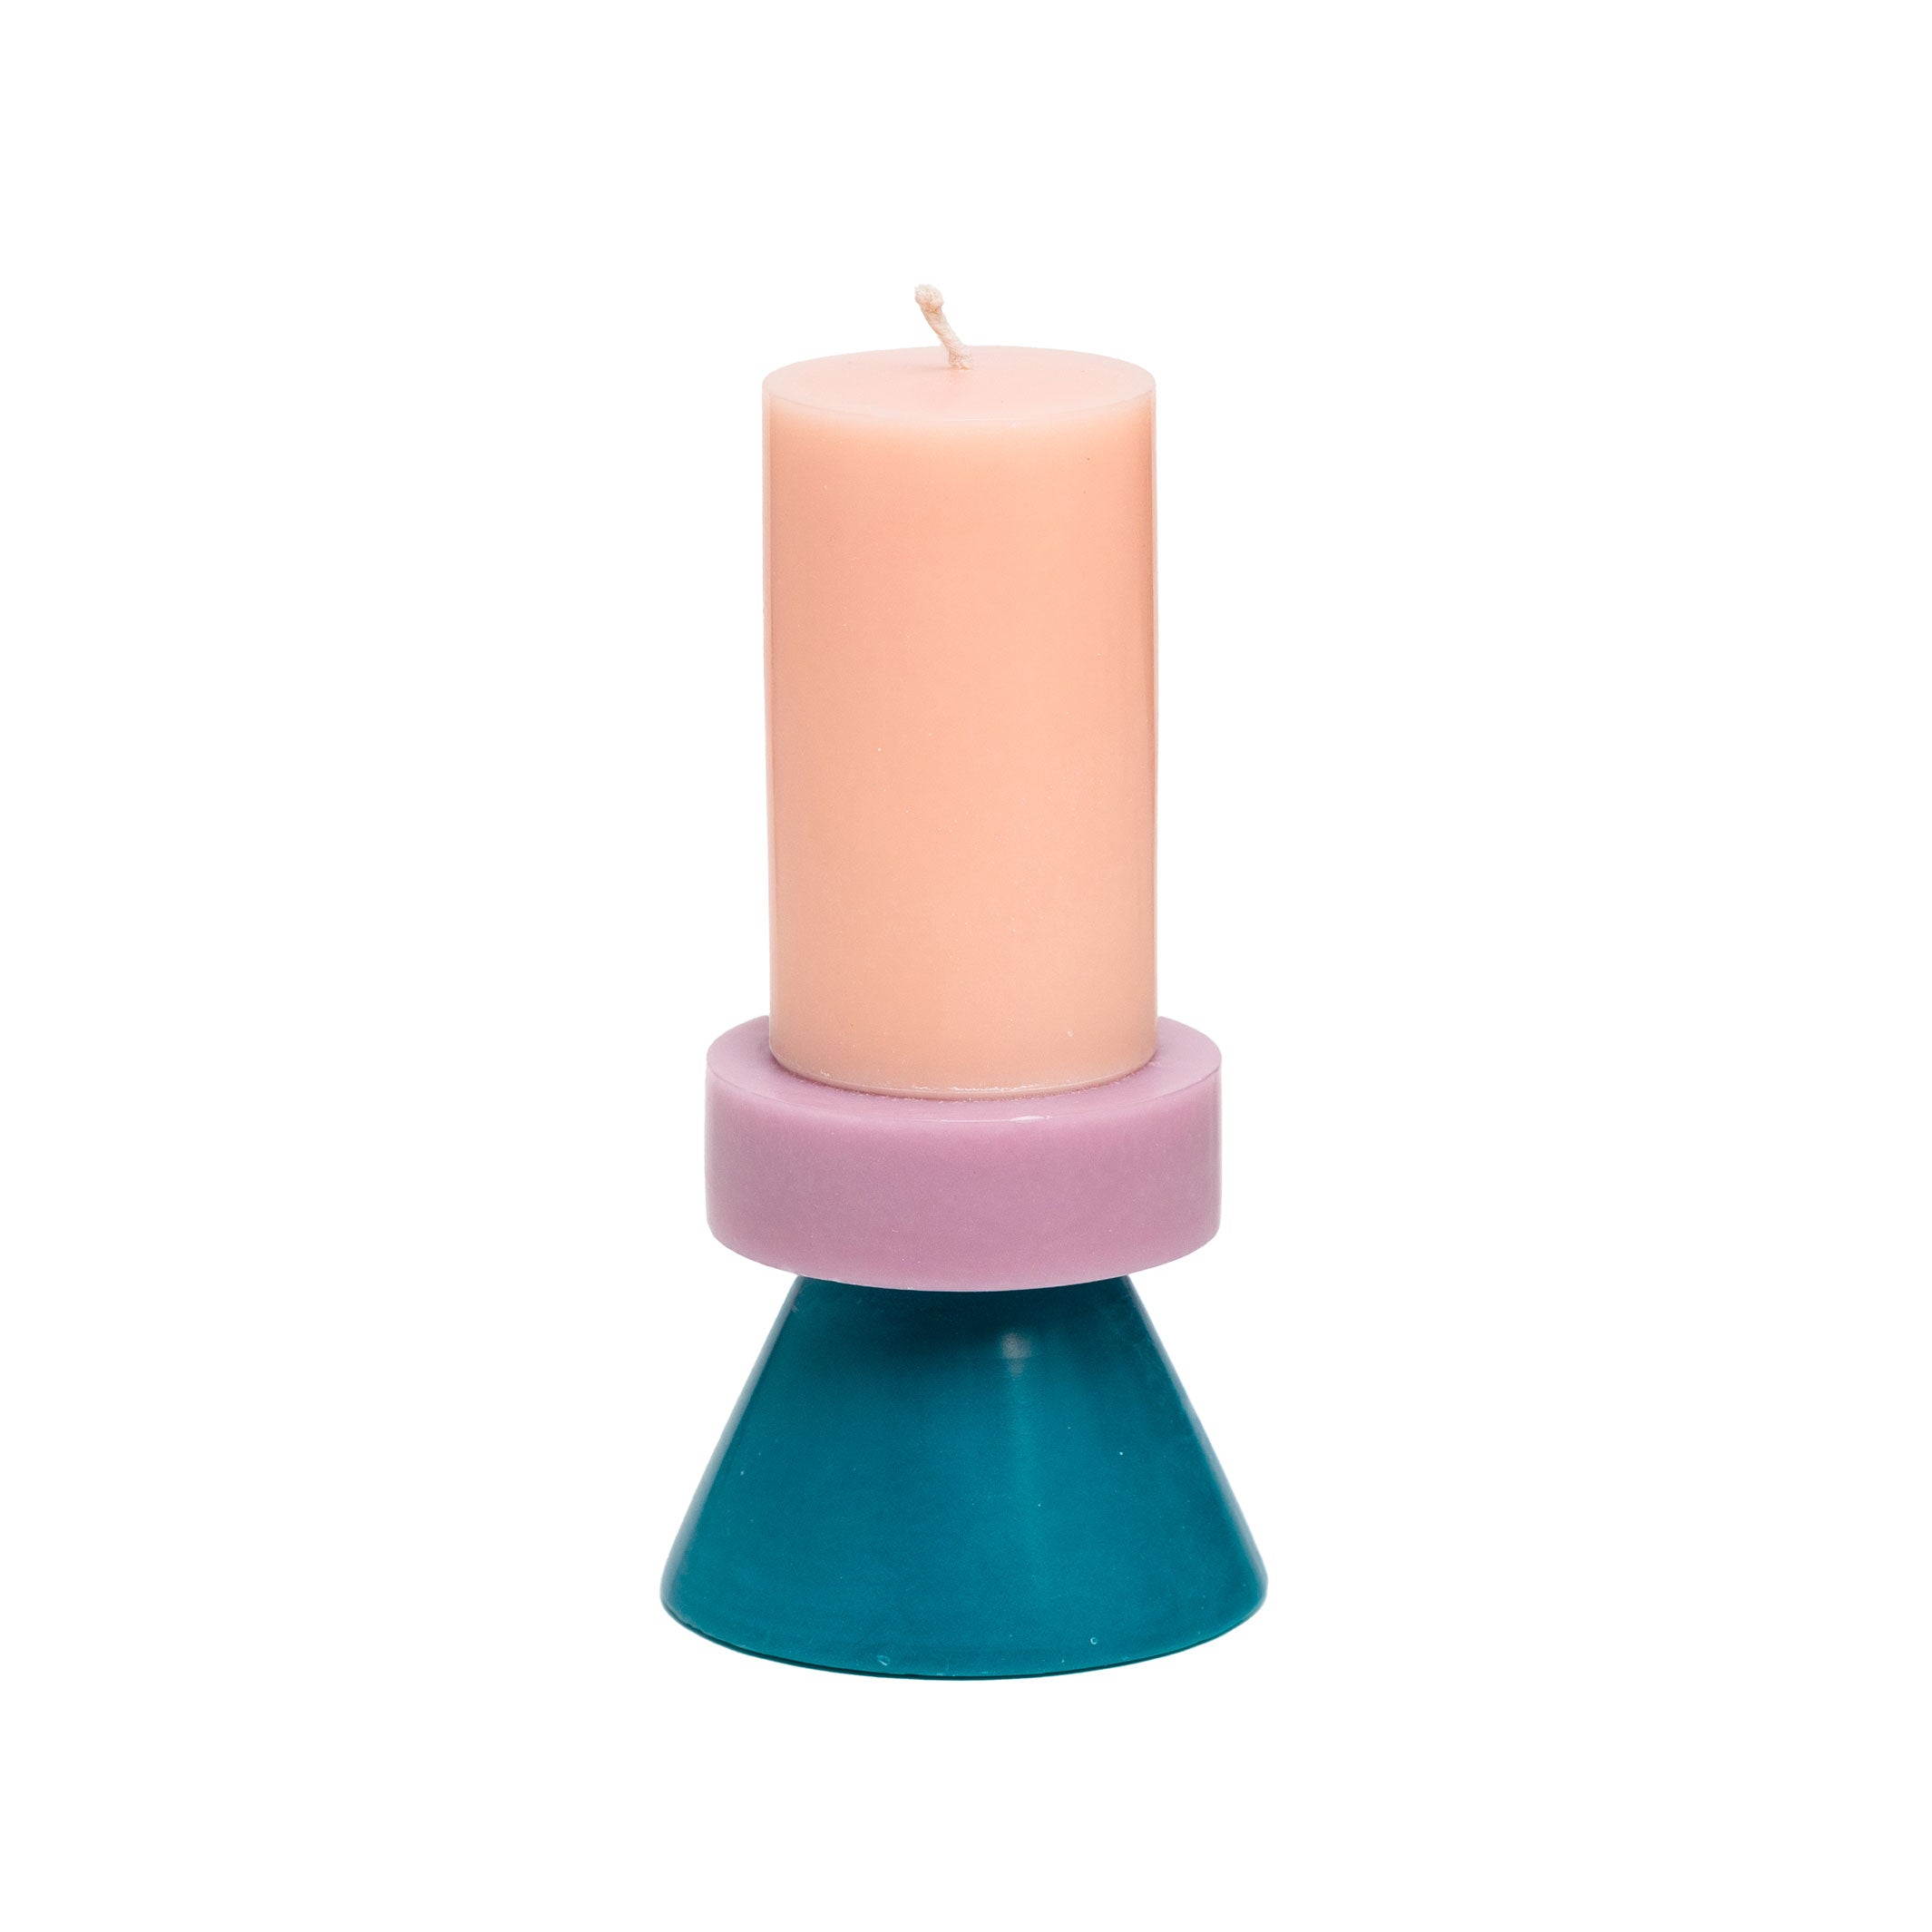 STACK CANDLE TALL | Colors blush-pastelpurple-teal | 30 hrs. burning time | YOD AND CO